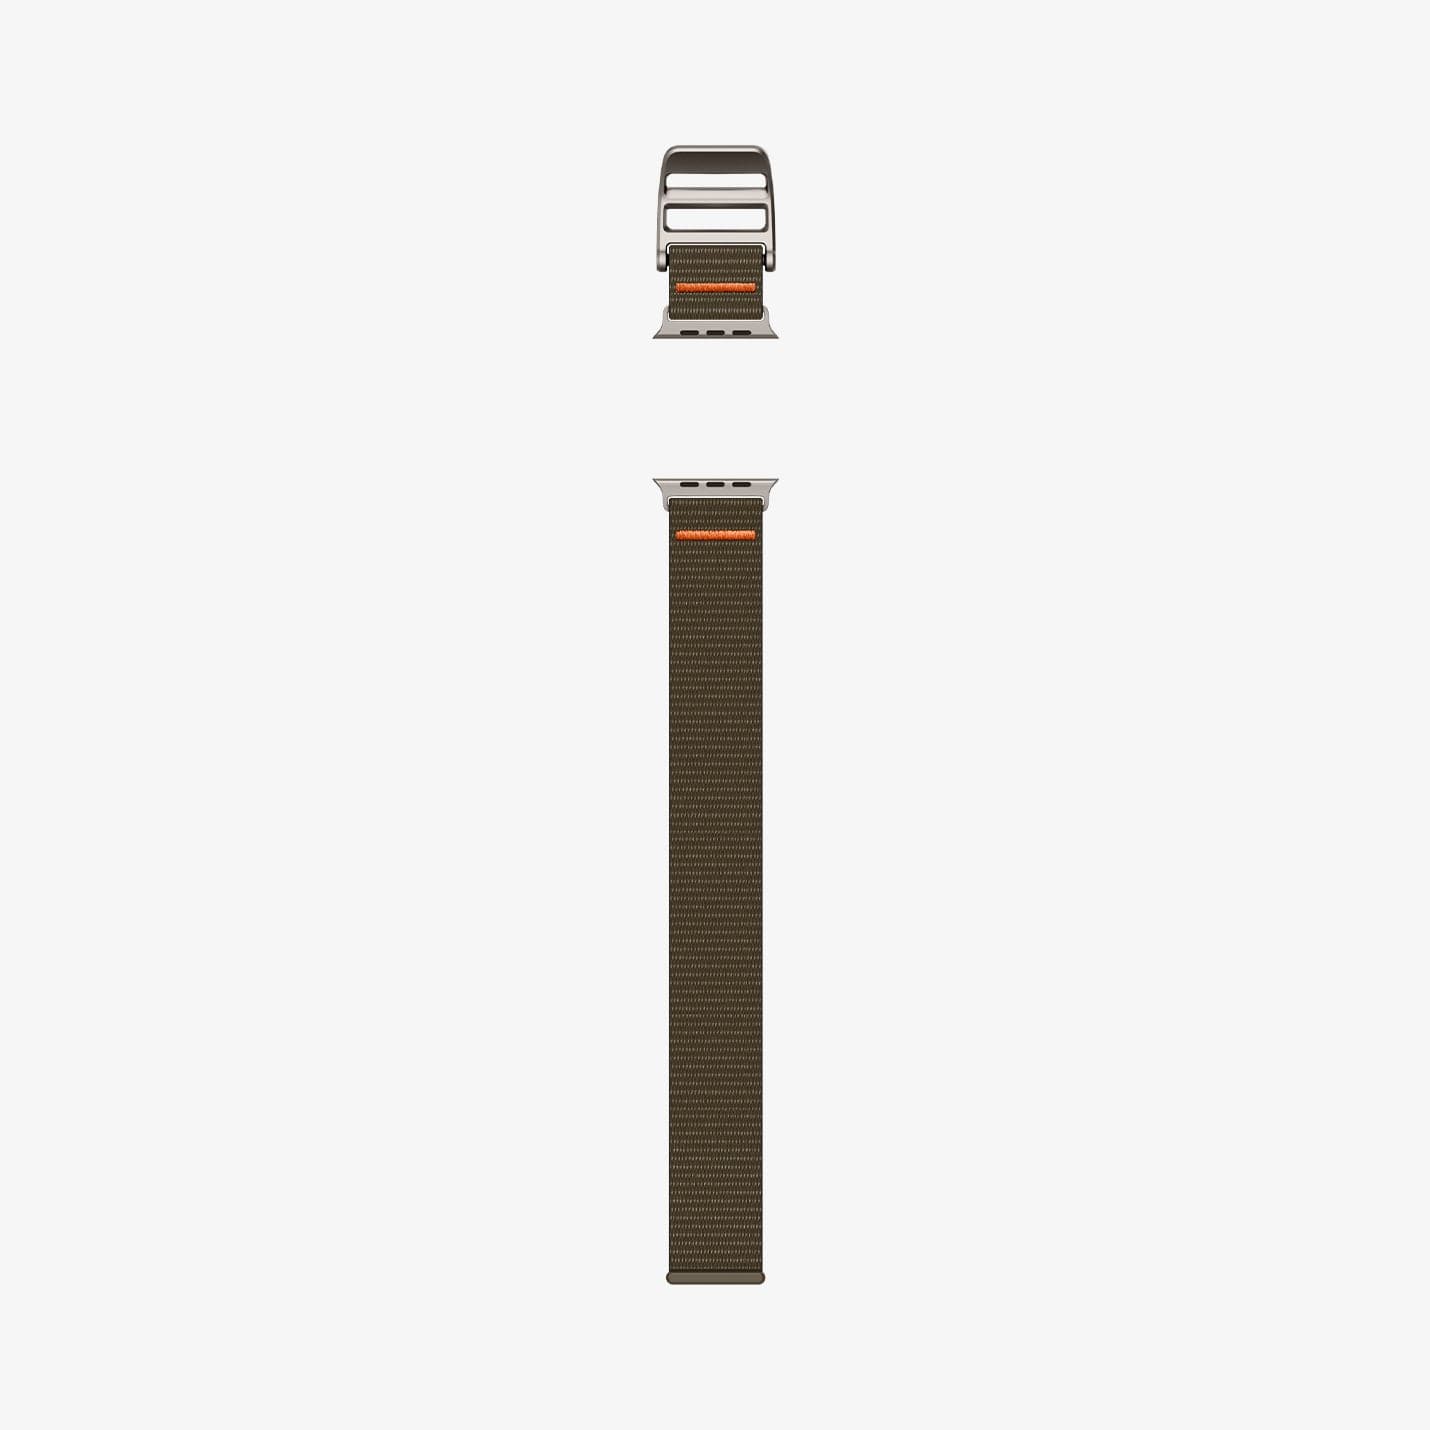 AMP05982 - Apple Watch (49mm) DuraPro Flex Ultra in Khaki showing the 2 sides of the strap lay out flat